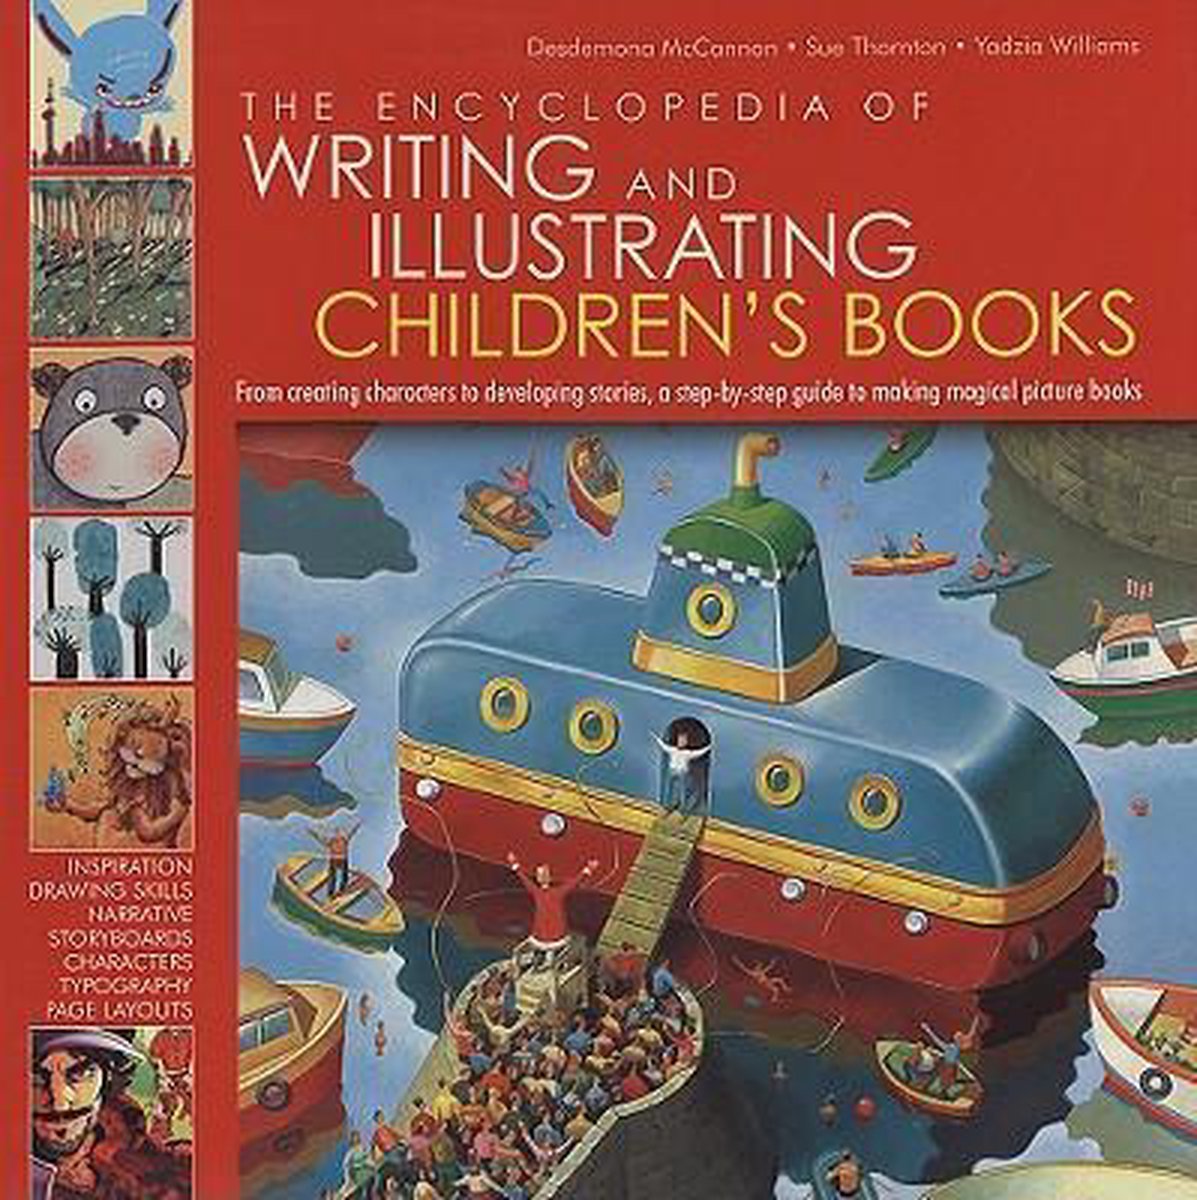 The Encyclopedia of Writing and Illustrating Children's Books - Desdemona Mccannon